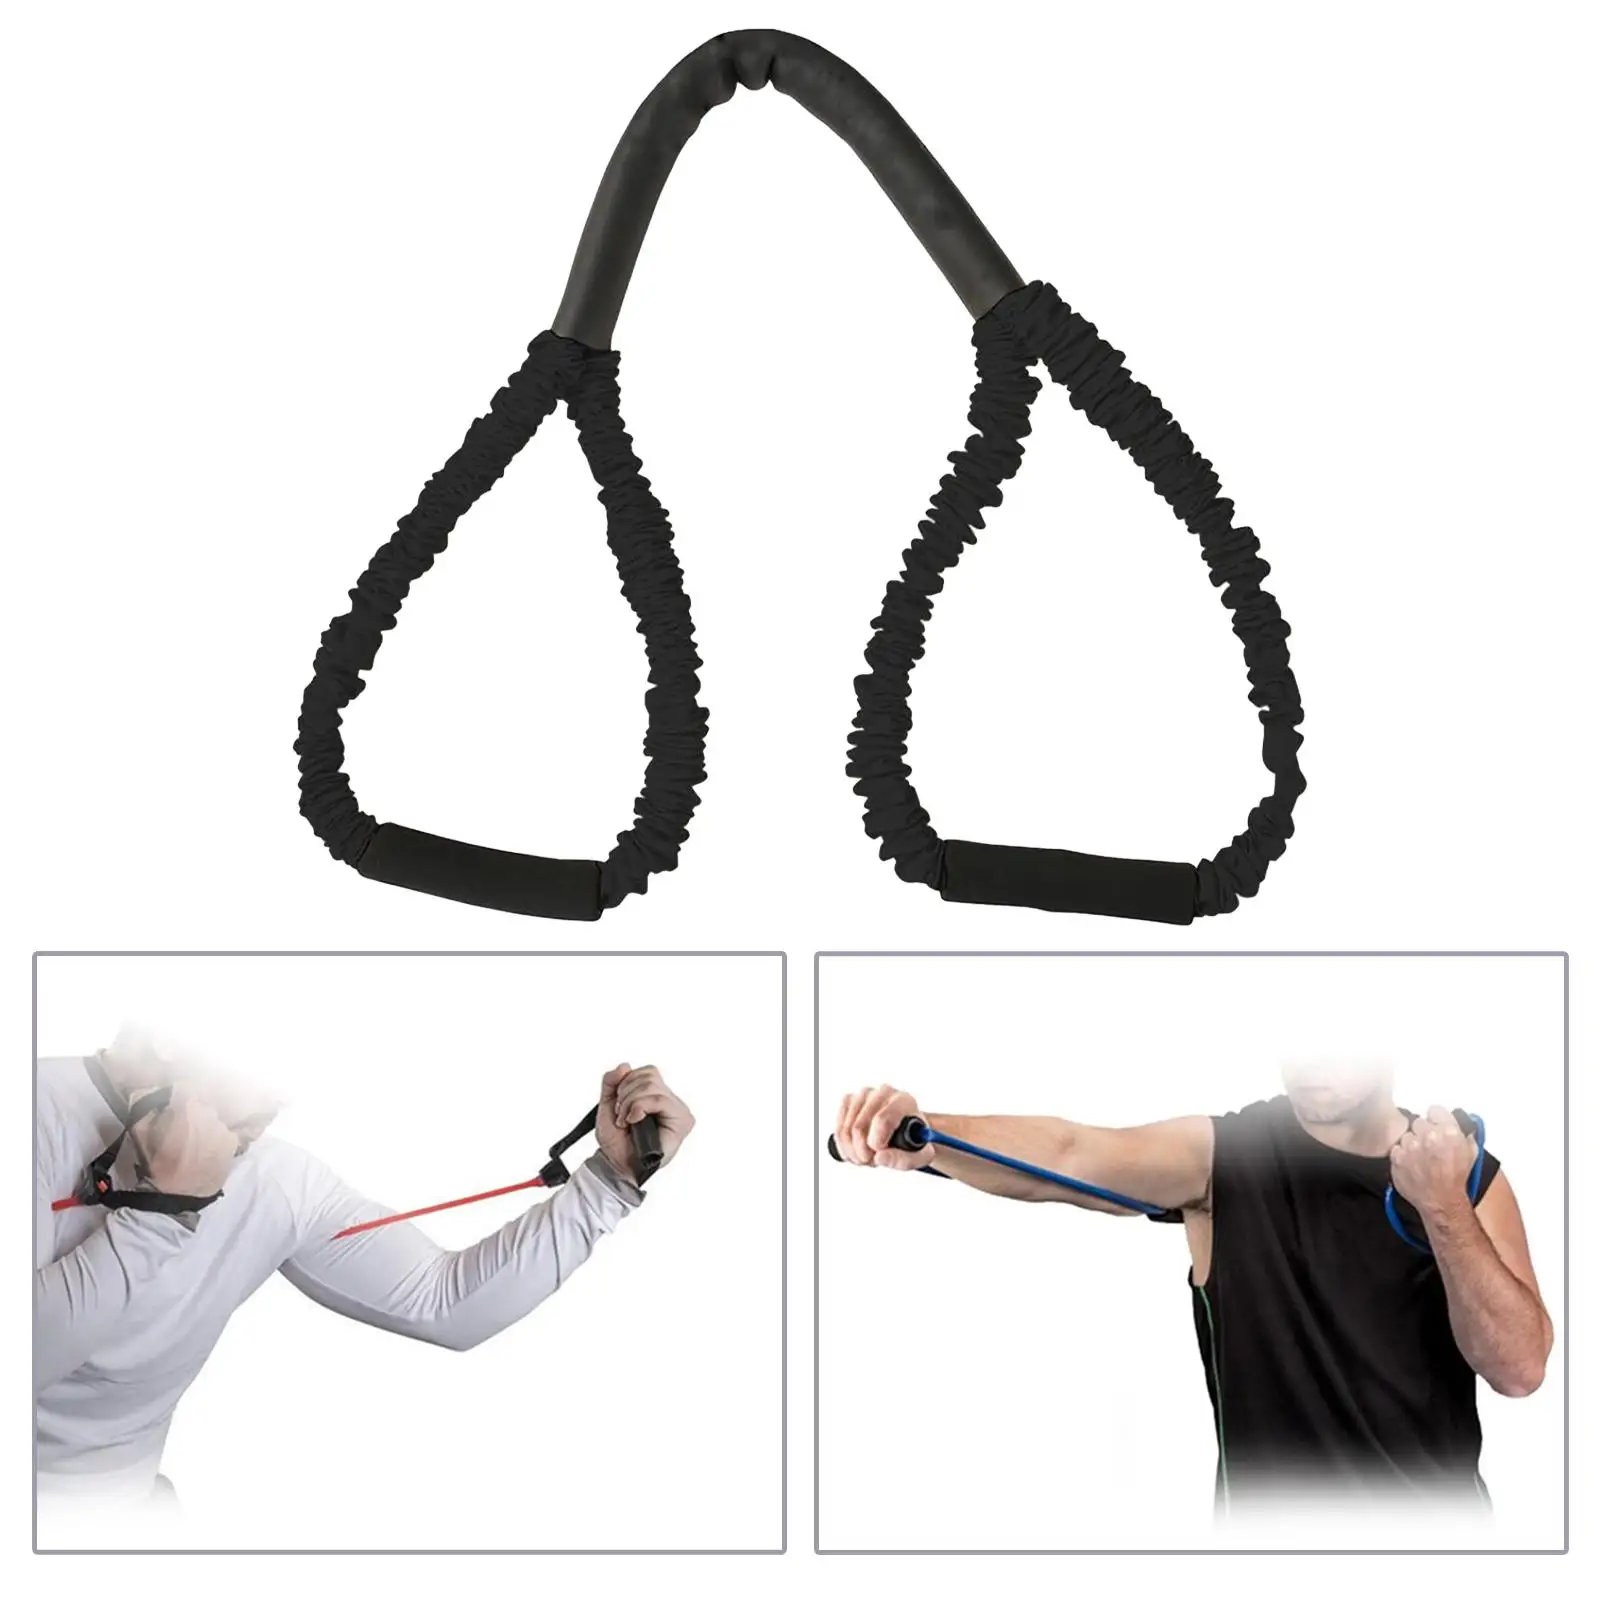 Boxing Resistance Bands Football Volleyball Workout Equipment Exercise Bands